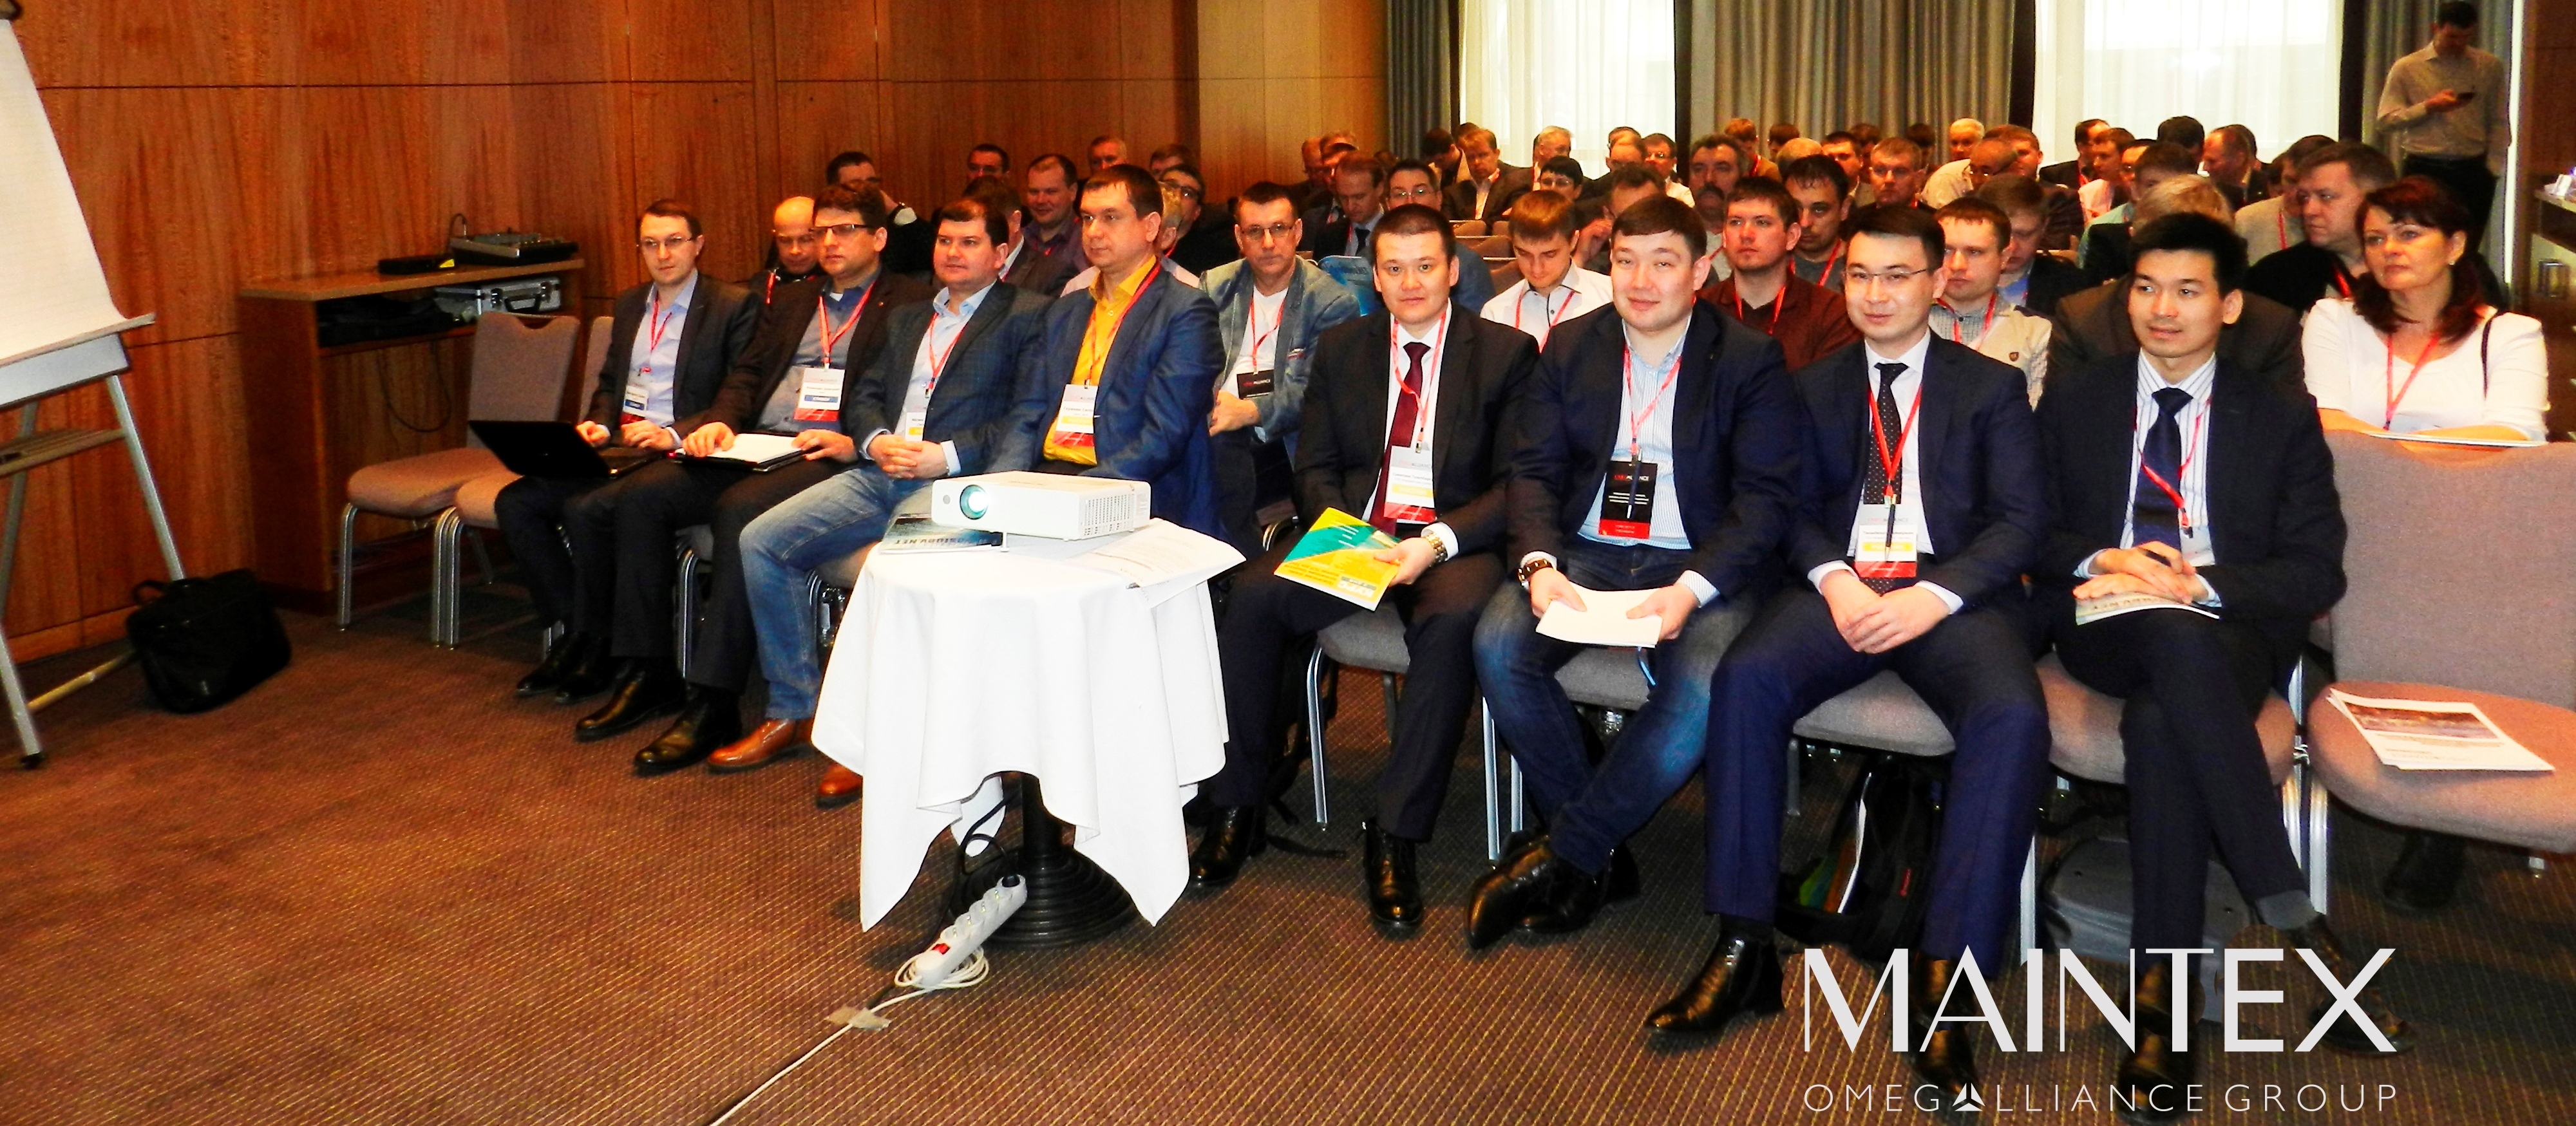 Maintex Held Second Annual Conference on Reliability Management